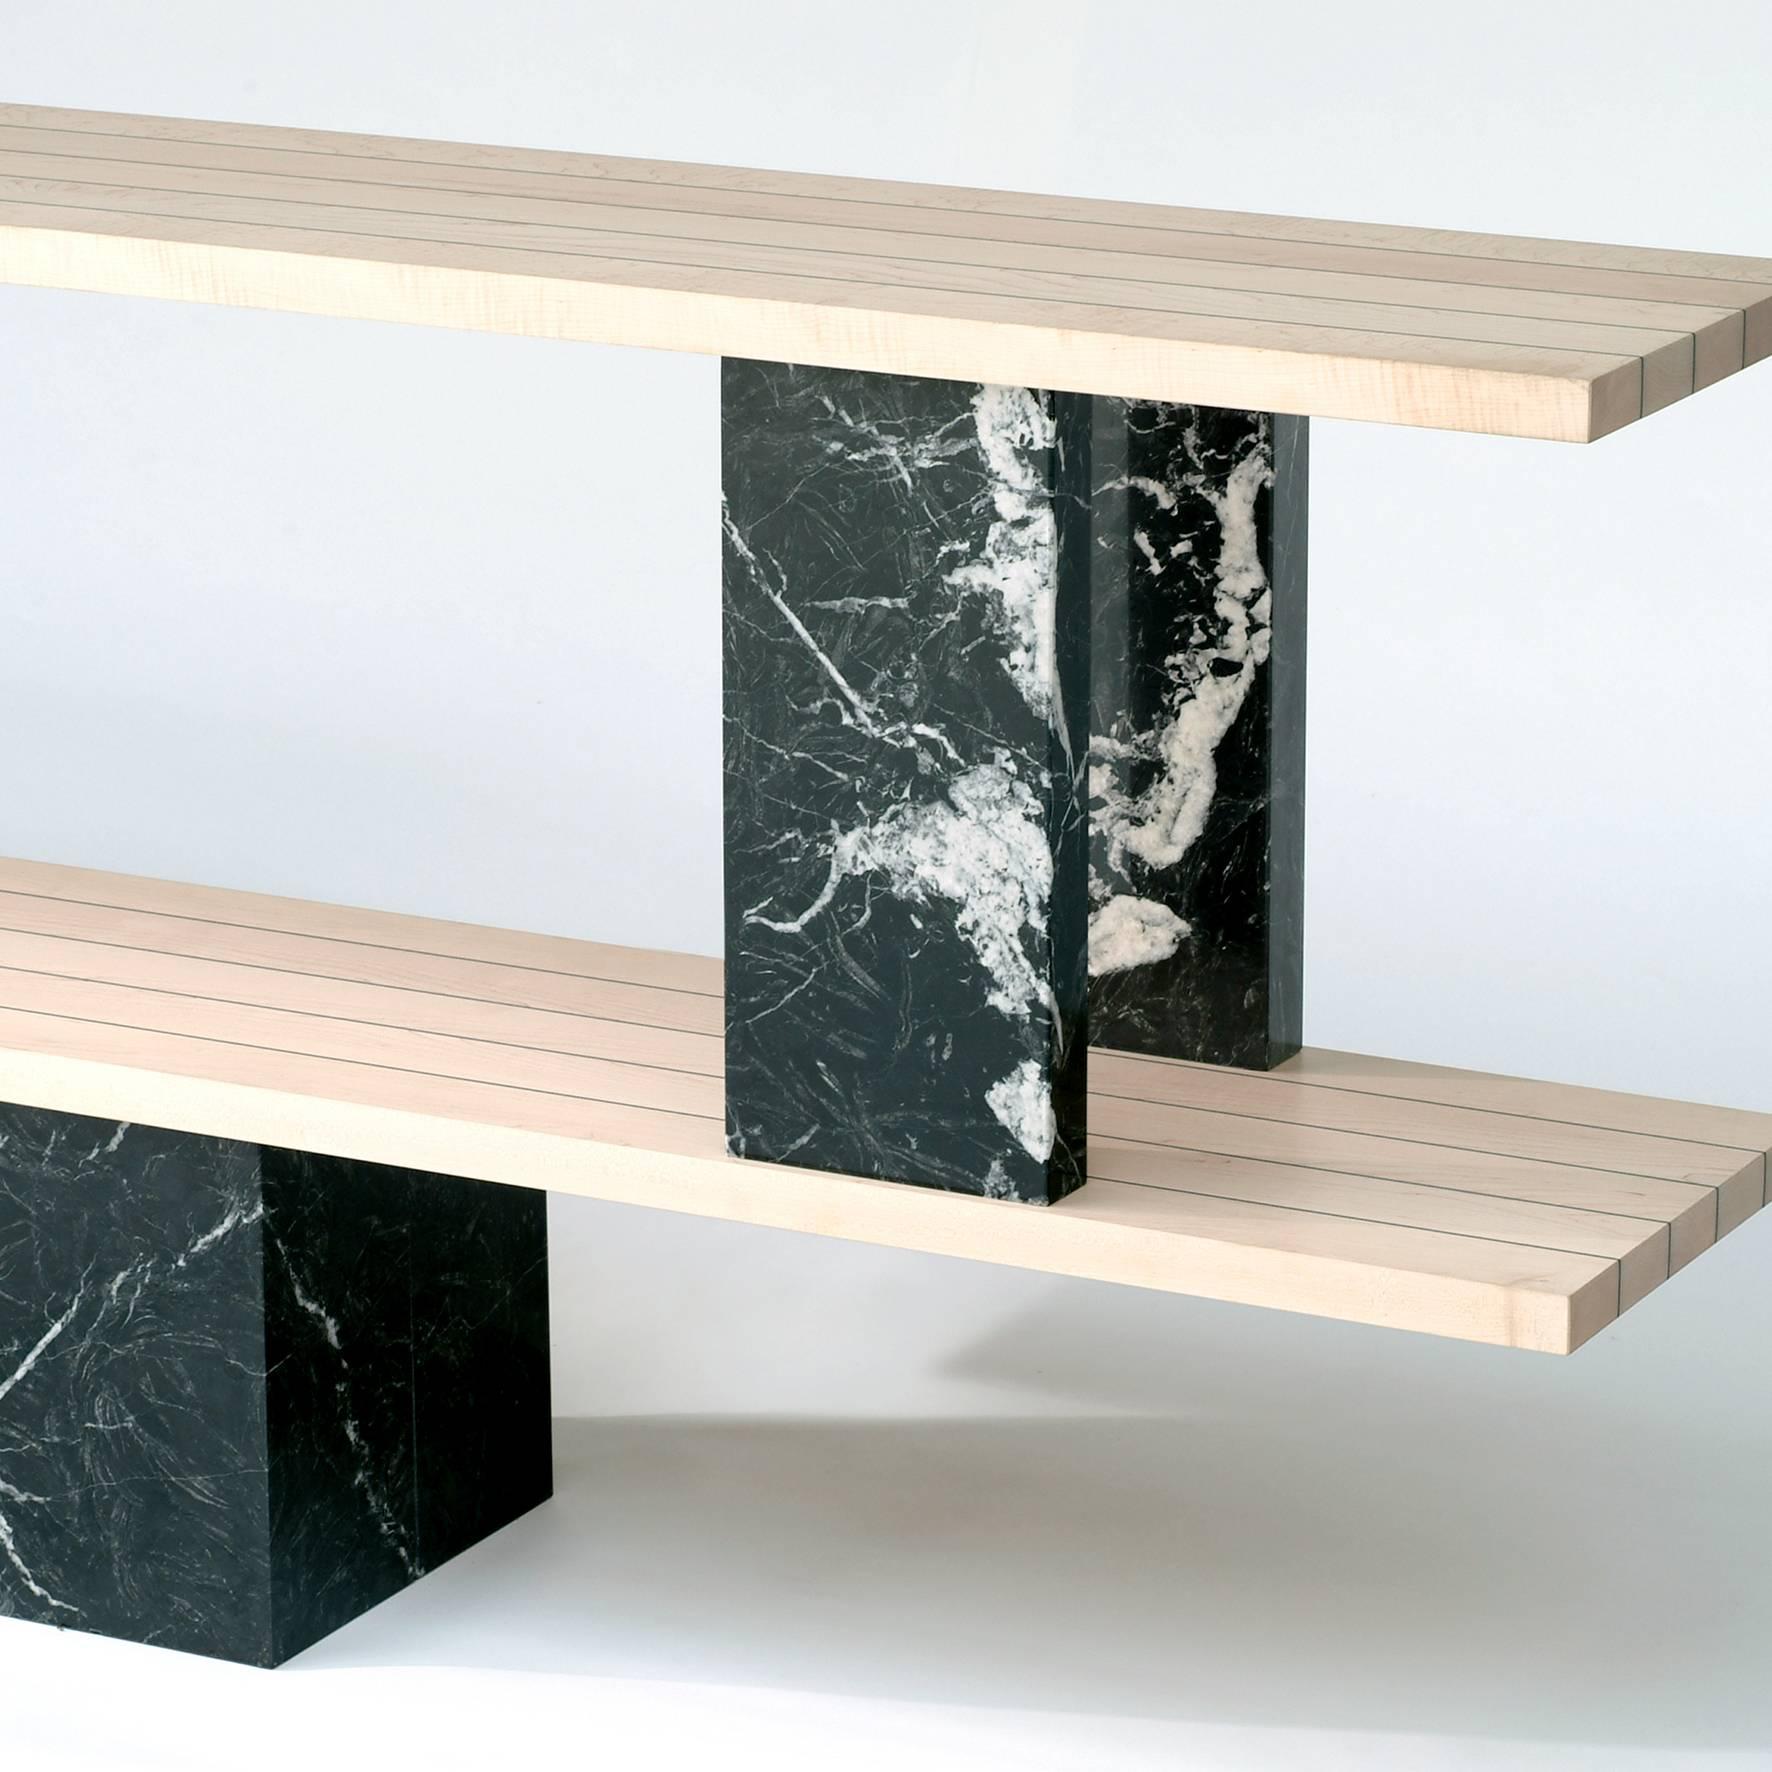 The ether console shelf is a balance challenge between fullness and emptiness. It is made of five dismantable pieces. The stability of the object is ensured by marble, which is a natural rock.
- Materials: Marquina marble, maple wood (Also